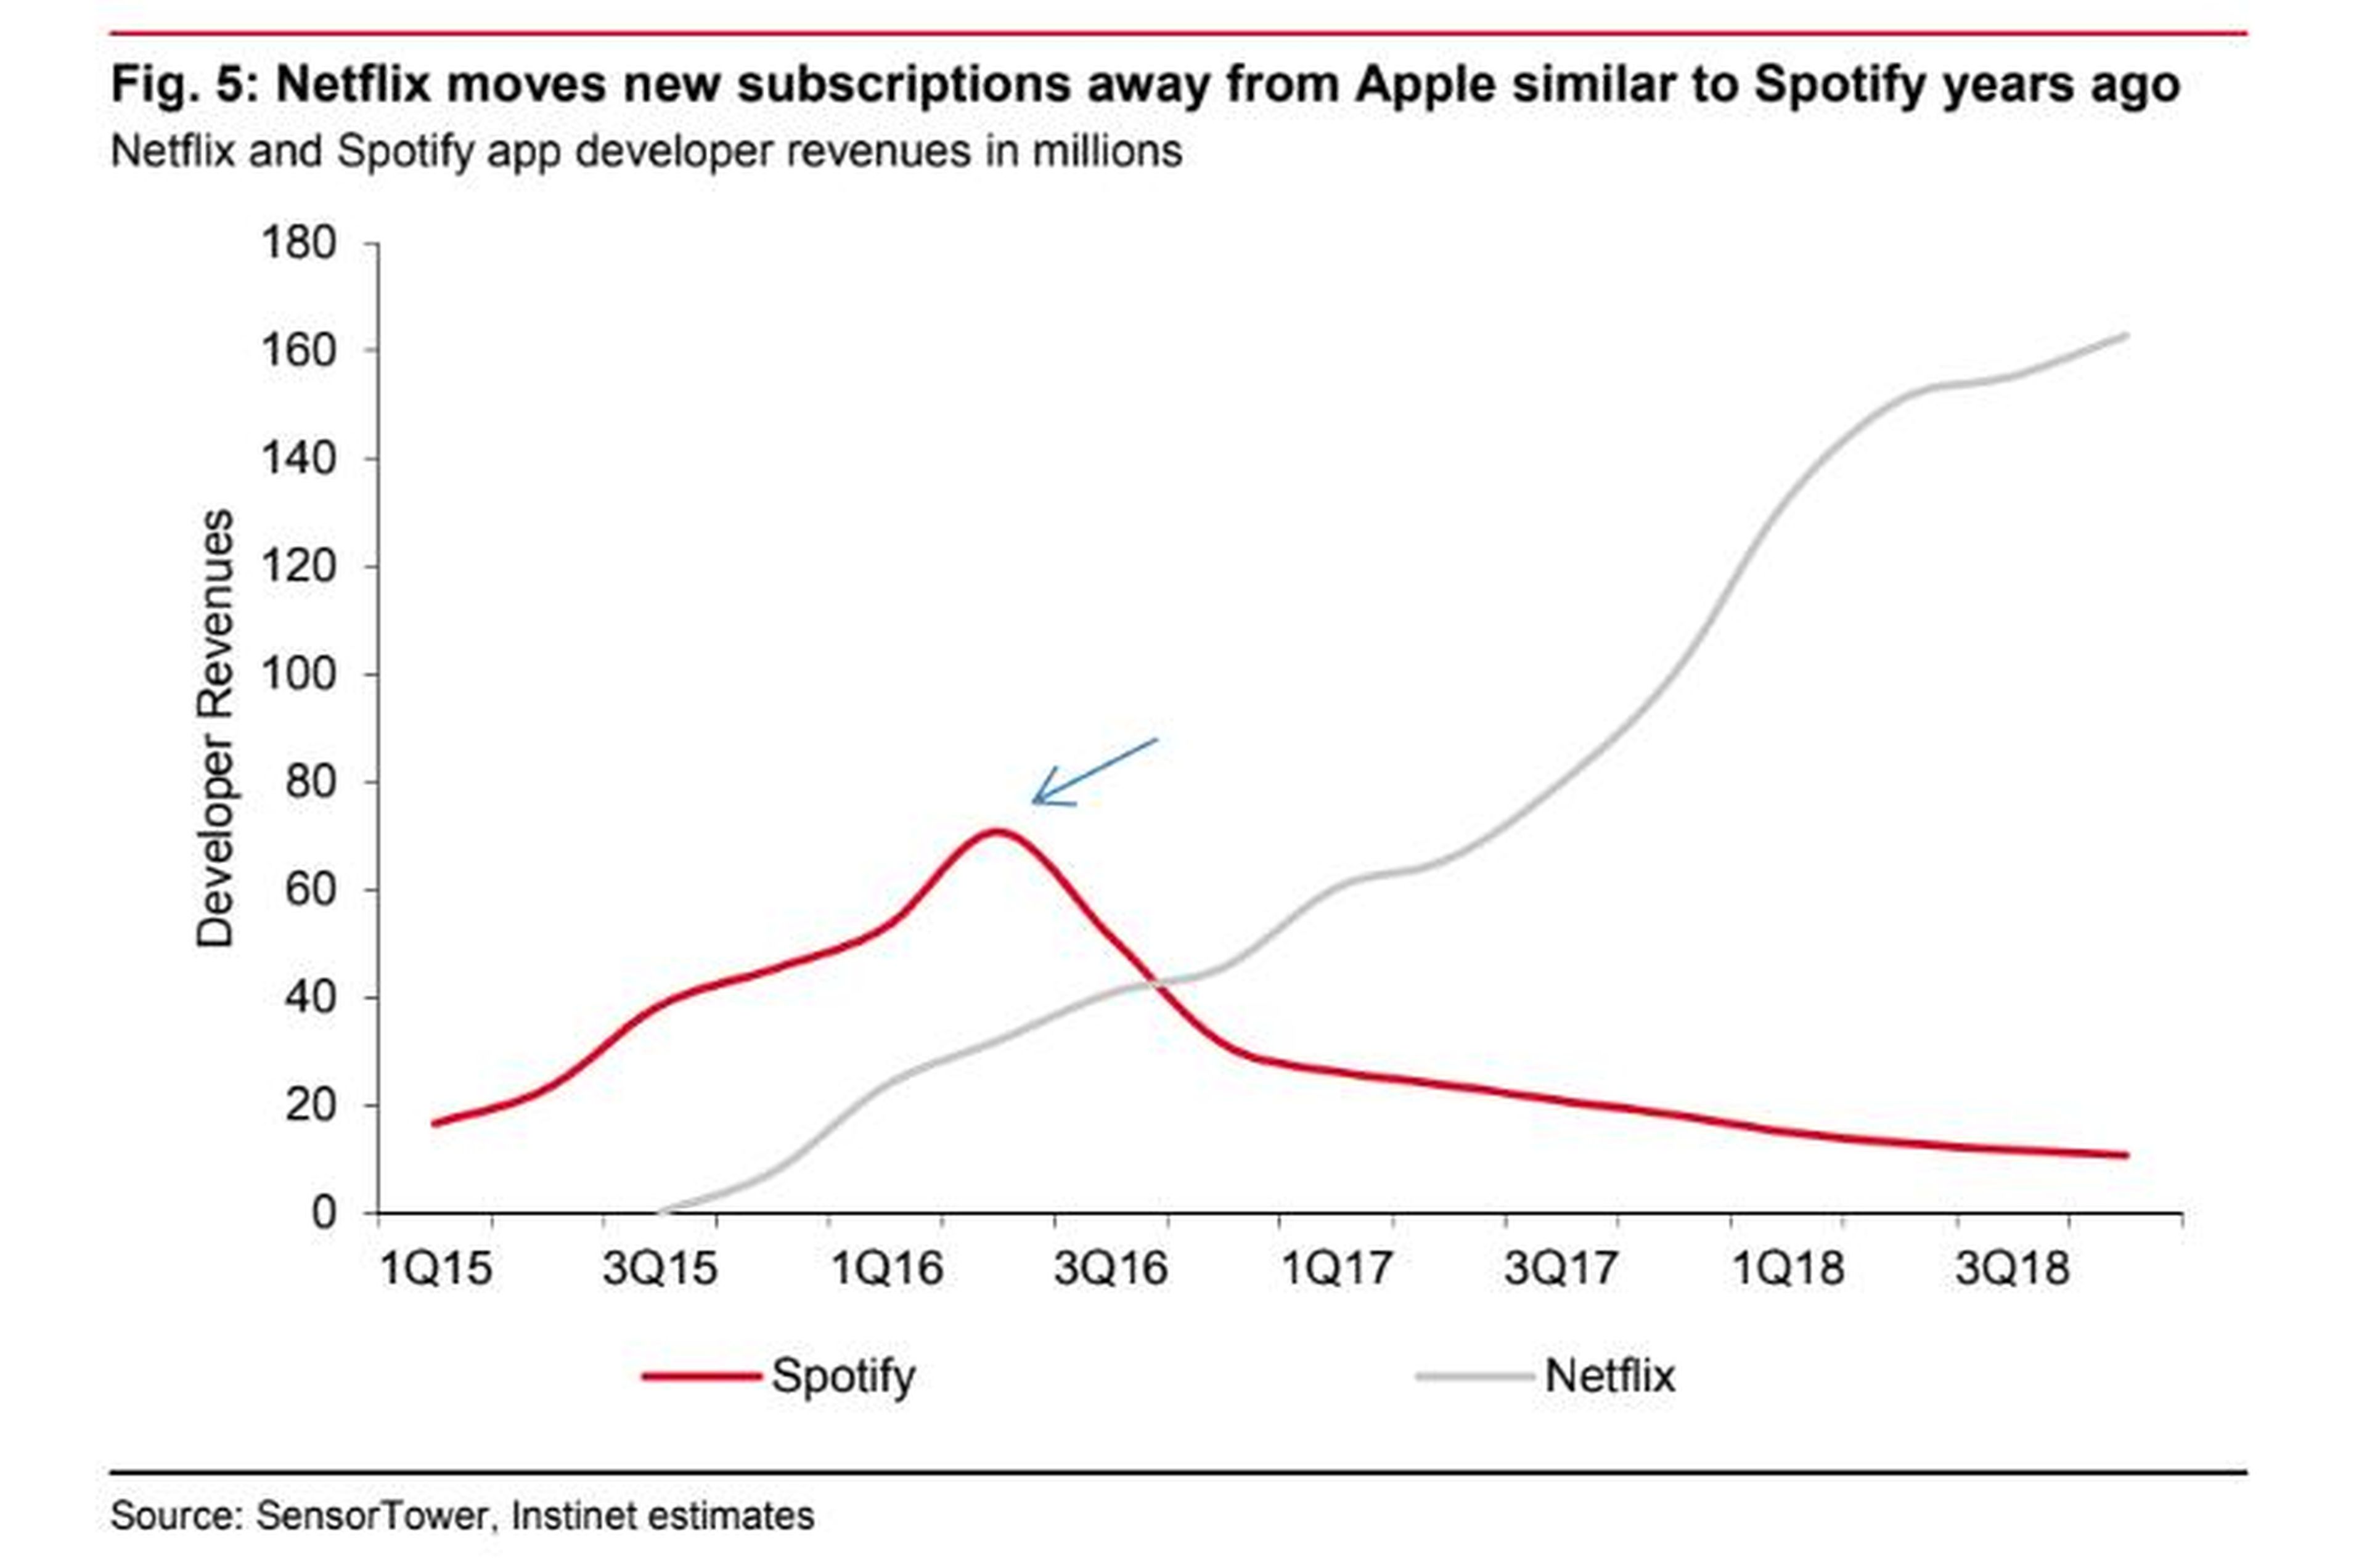 App Store revenue from Spotify saw a dropoff in 2016, after the music firm encouraged users to subscribe directly rather than through Apple.